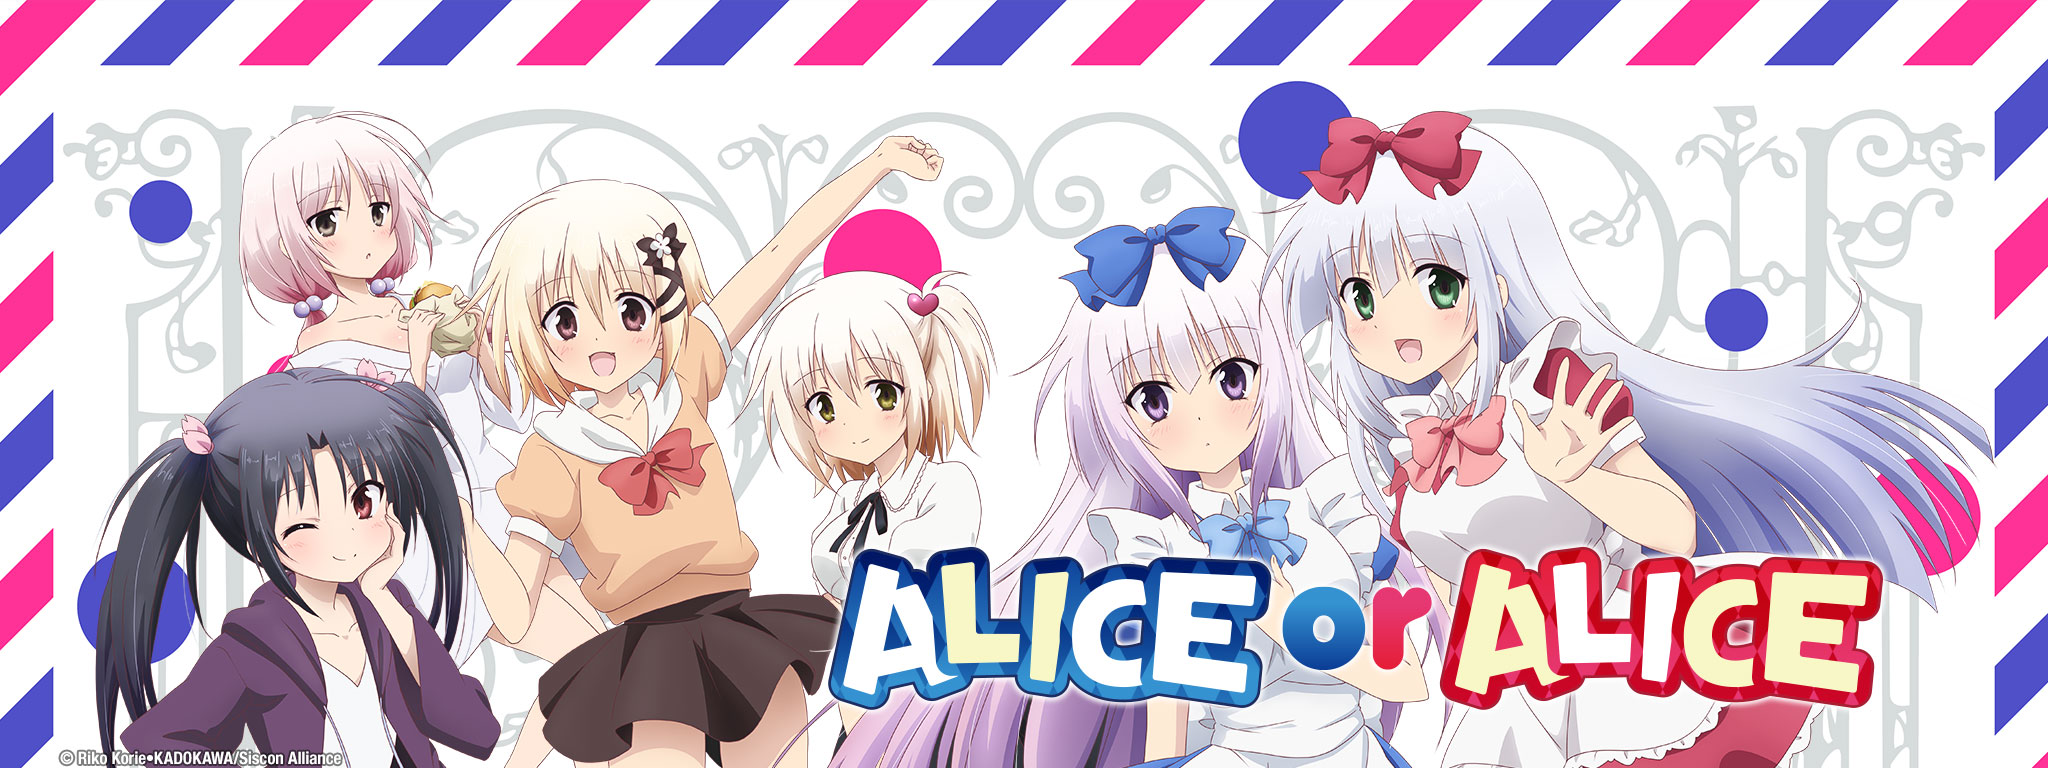 Title Art for ALICE or ALICE